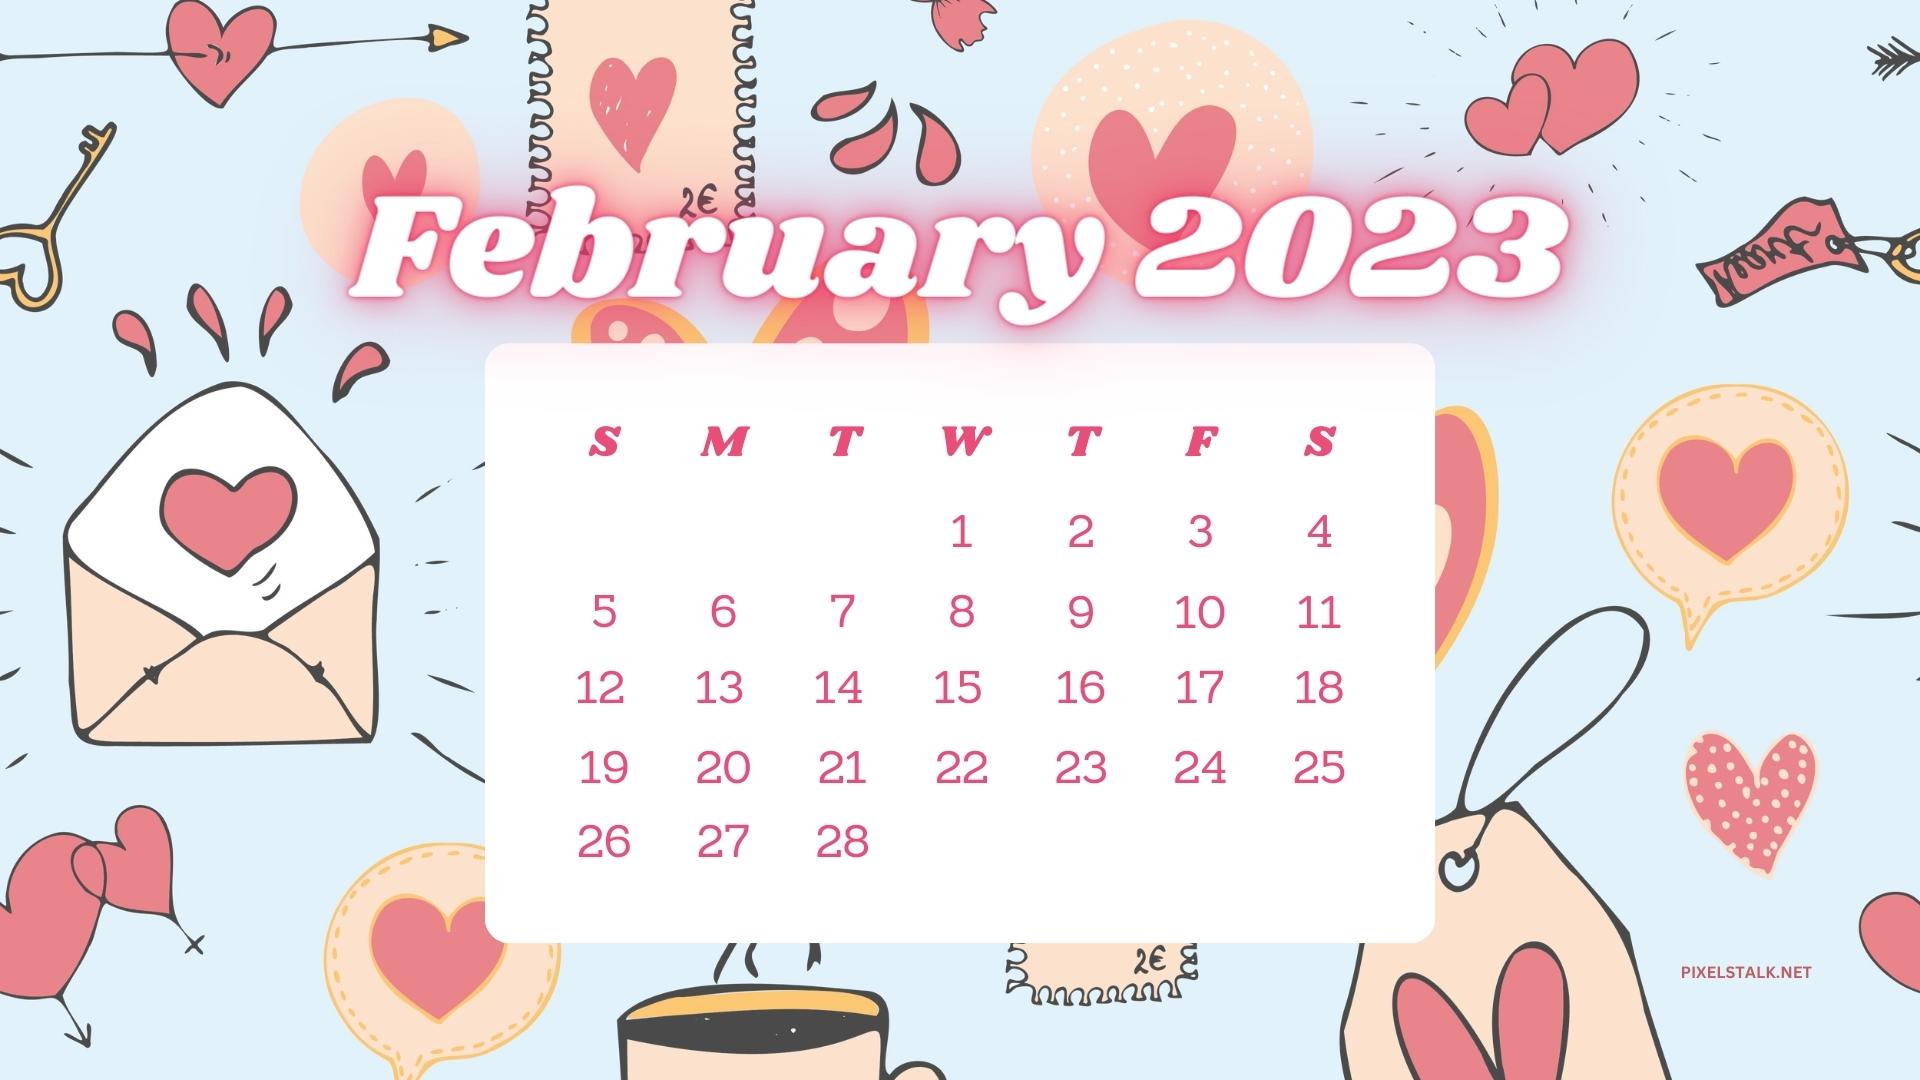 February 2023 Calendar Wallpapers HD Free Download 